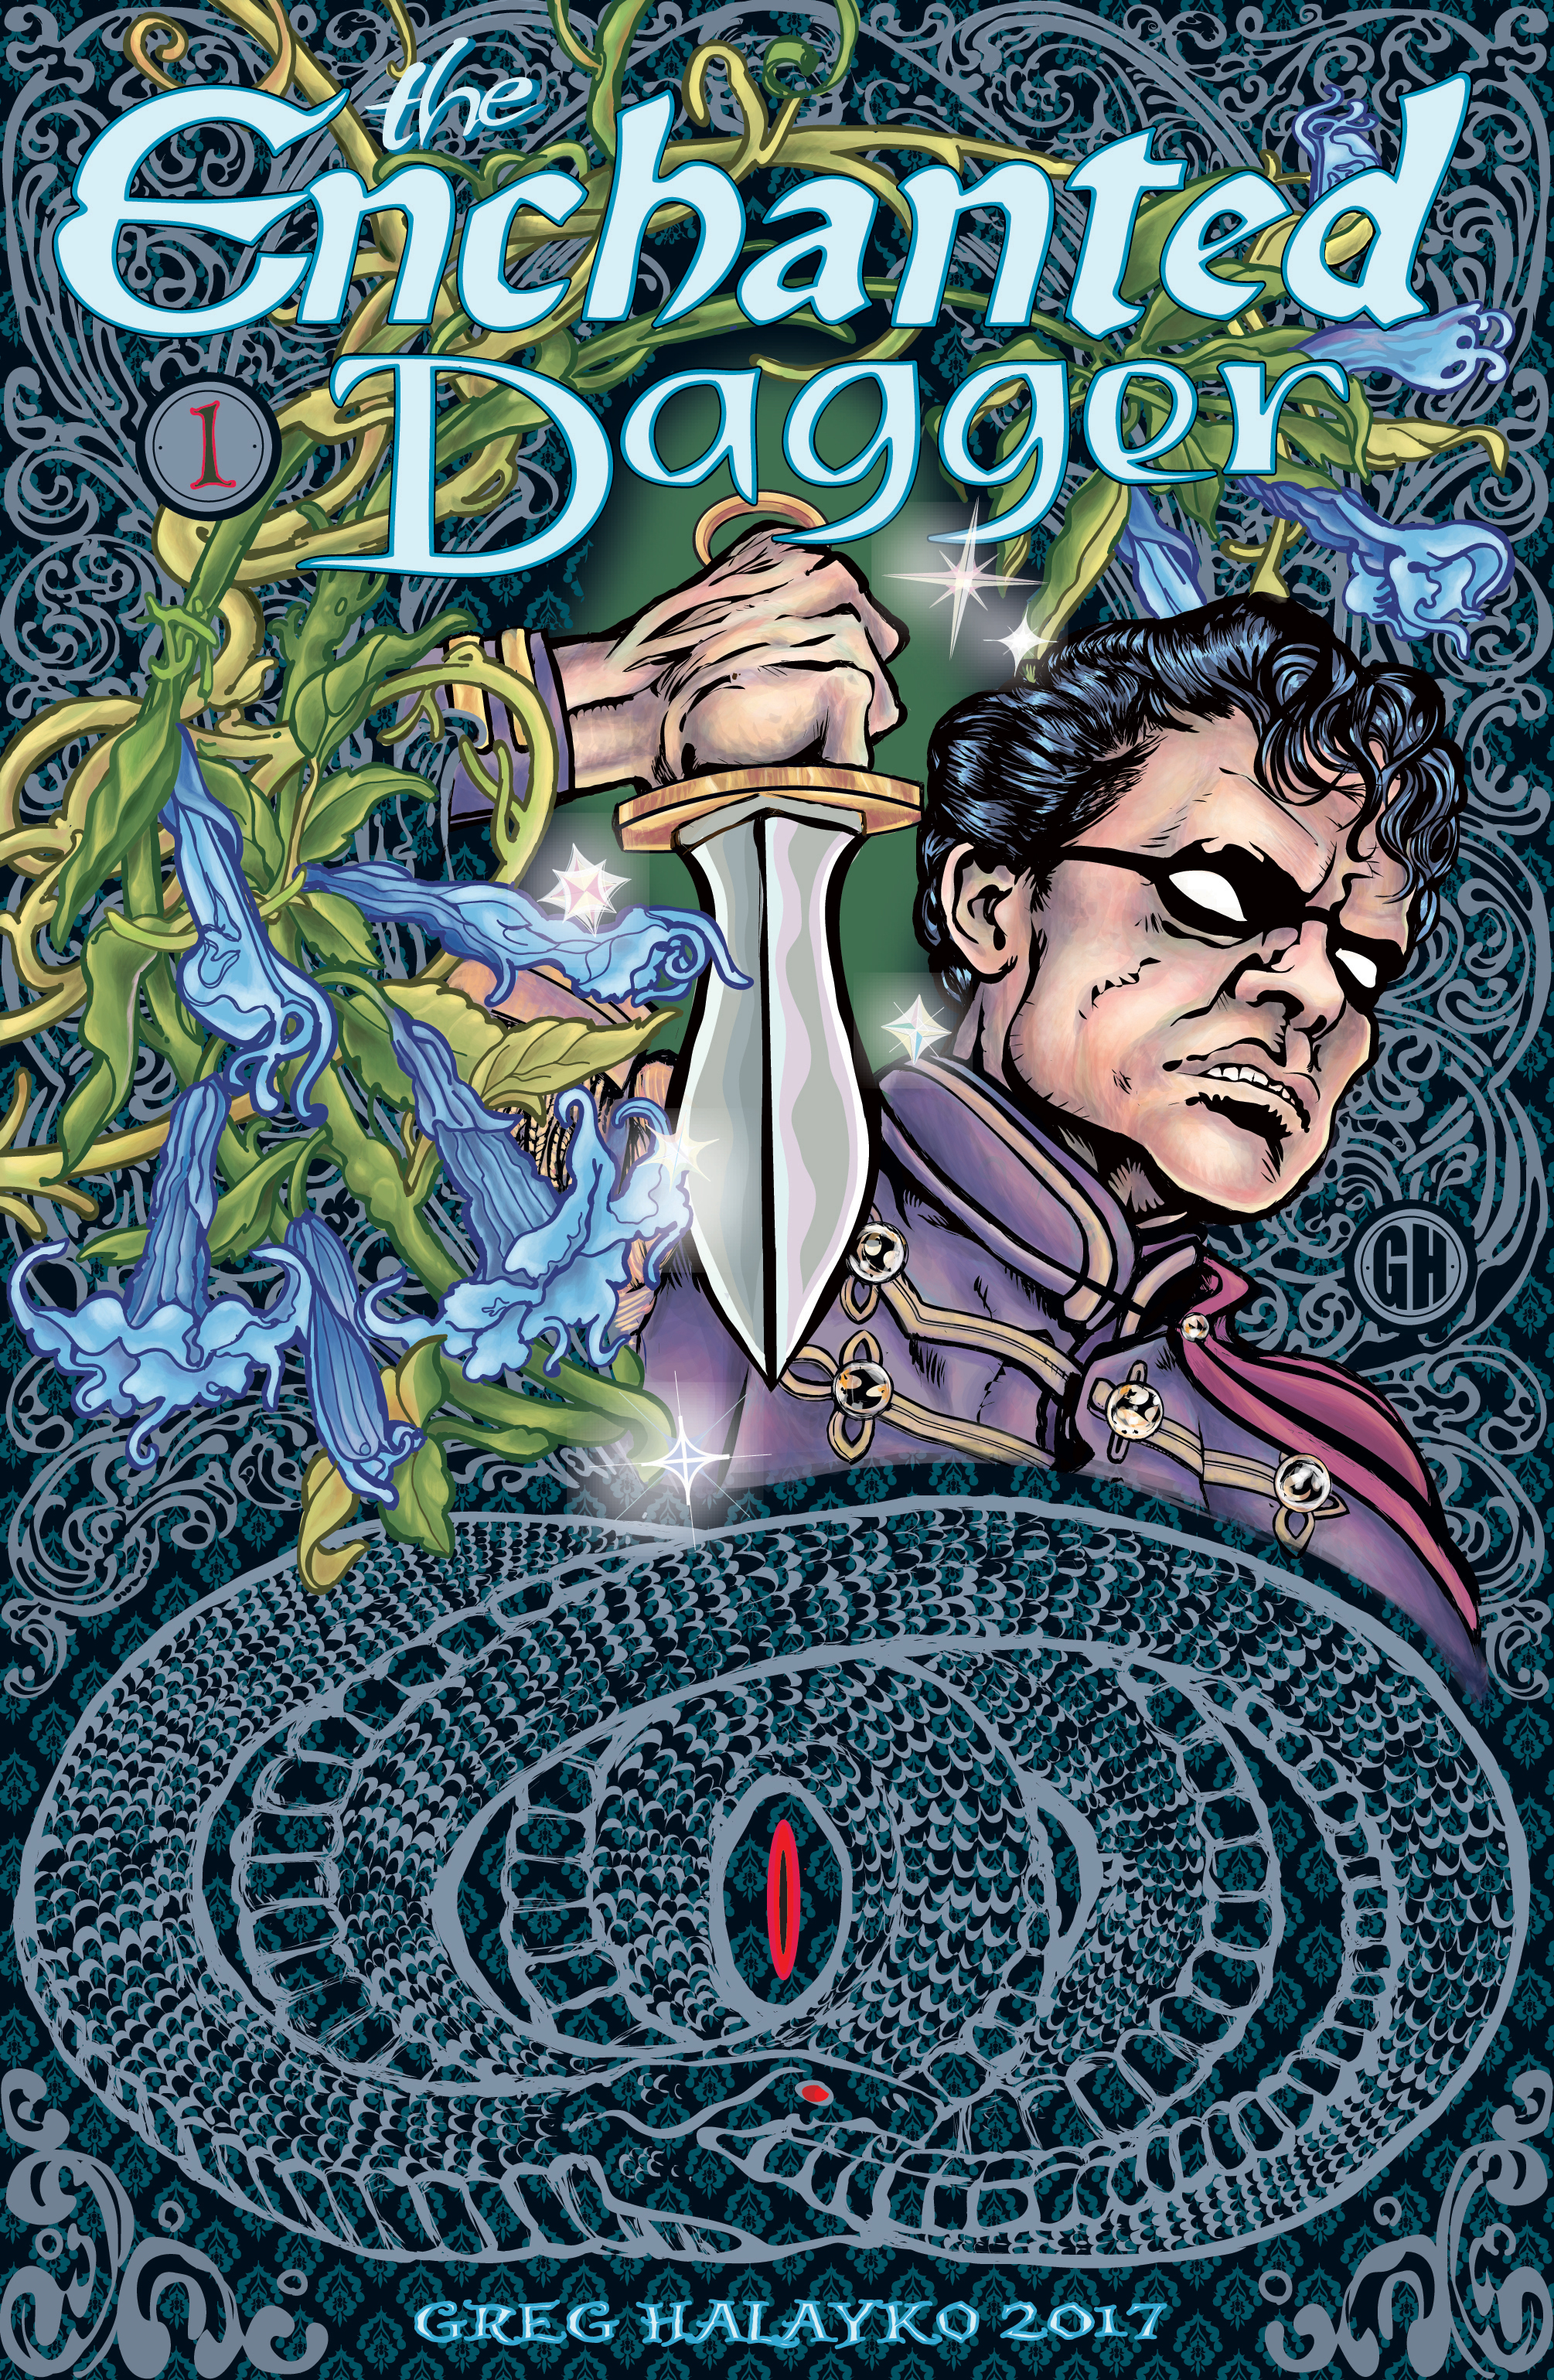 The Enchanted Dagger #1 – Cover